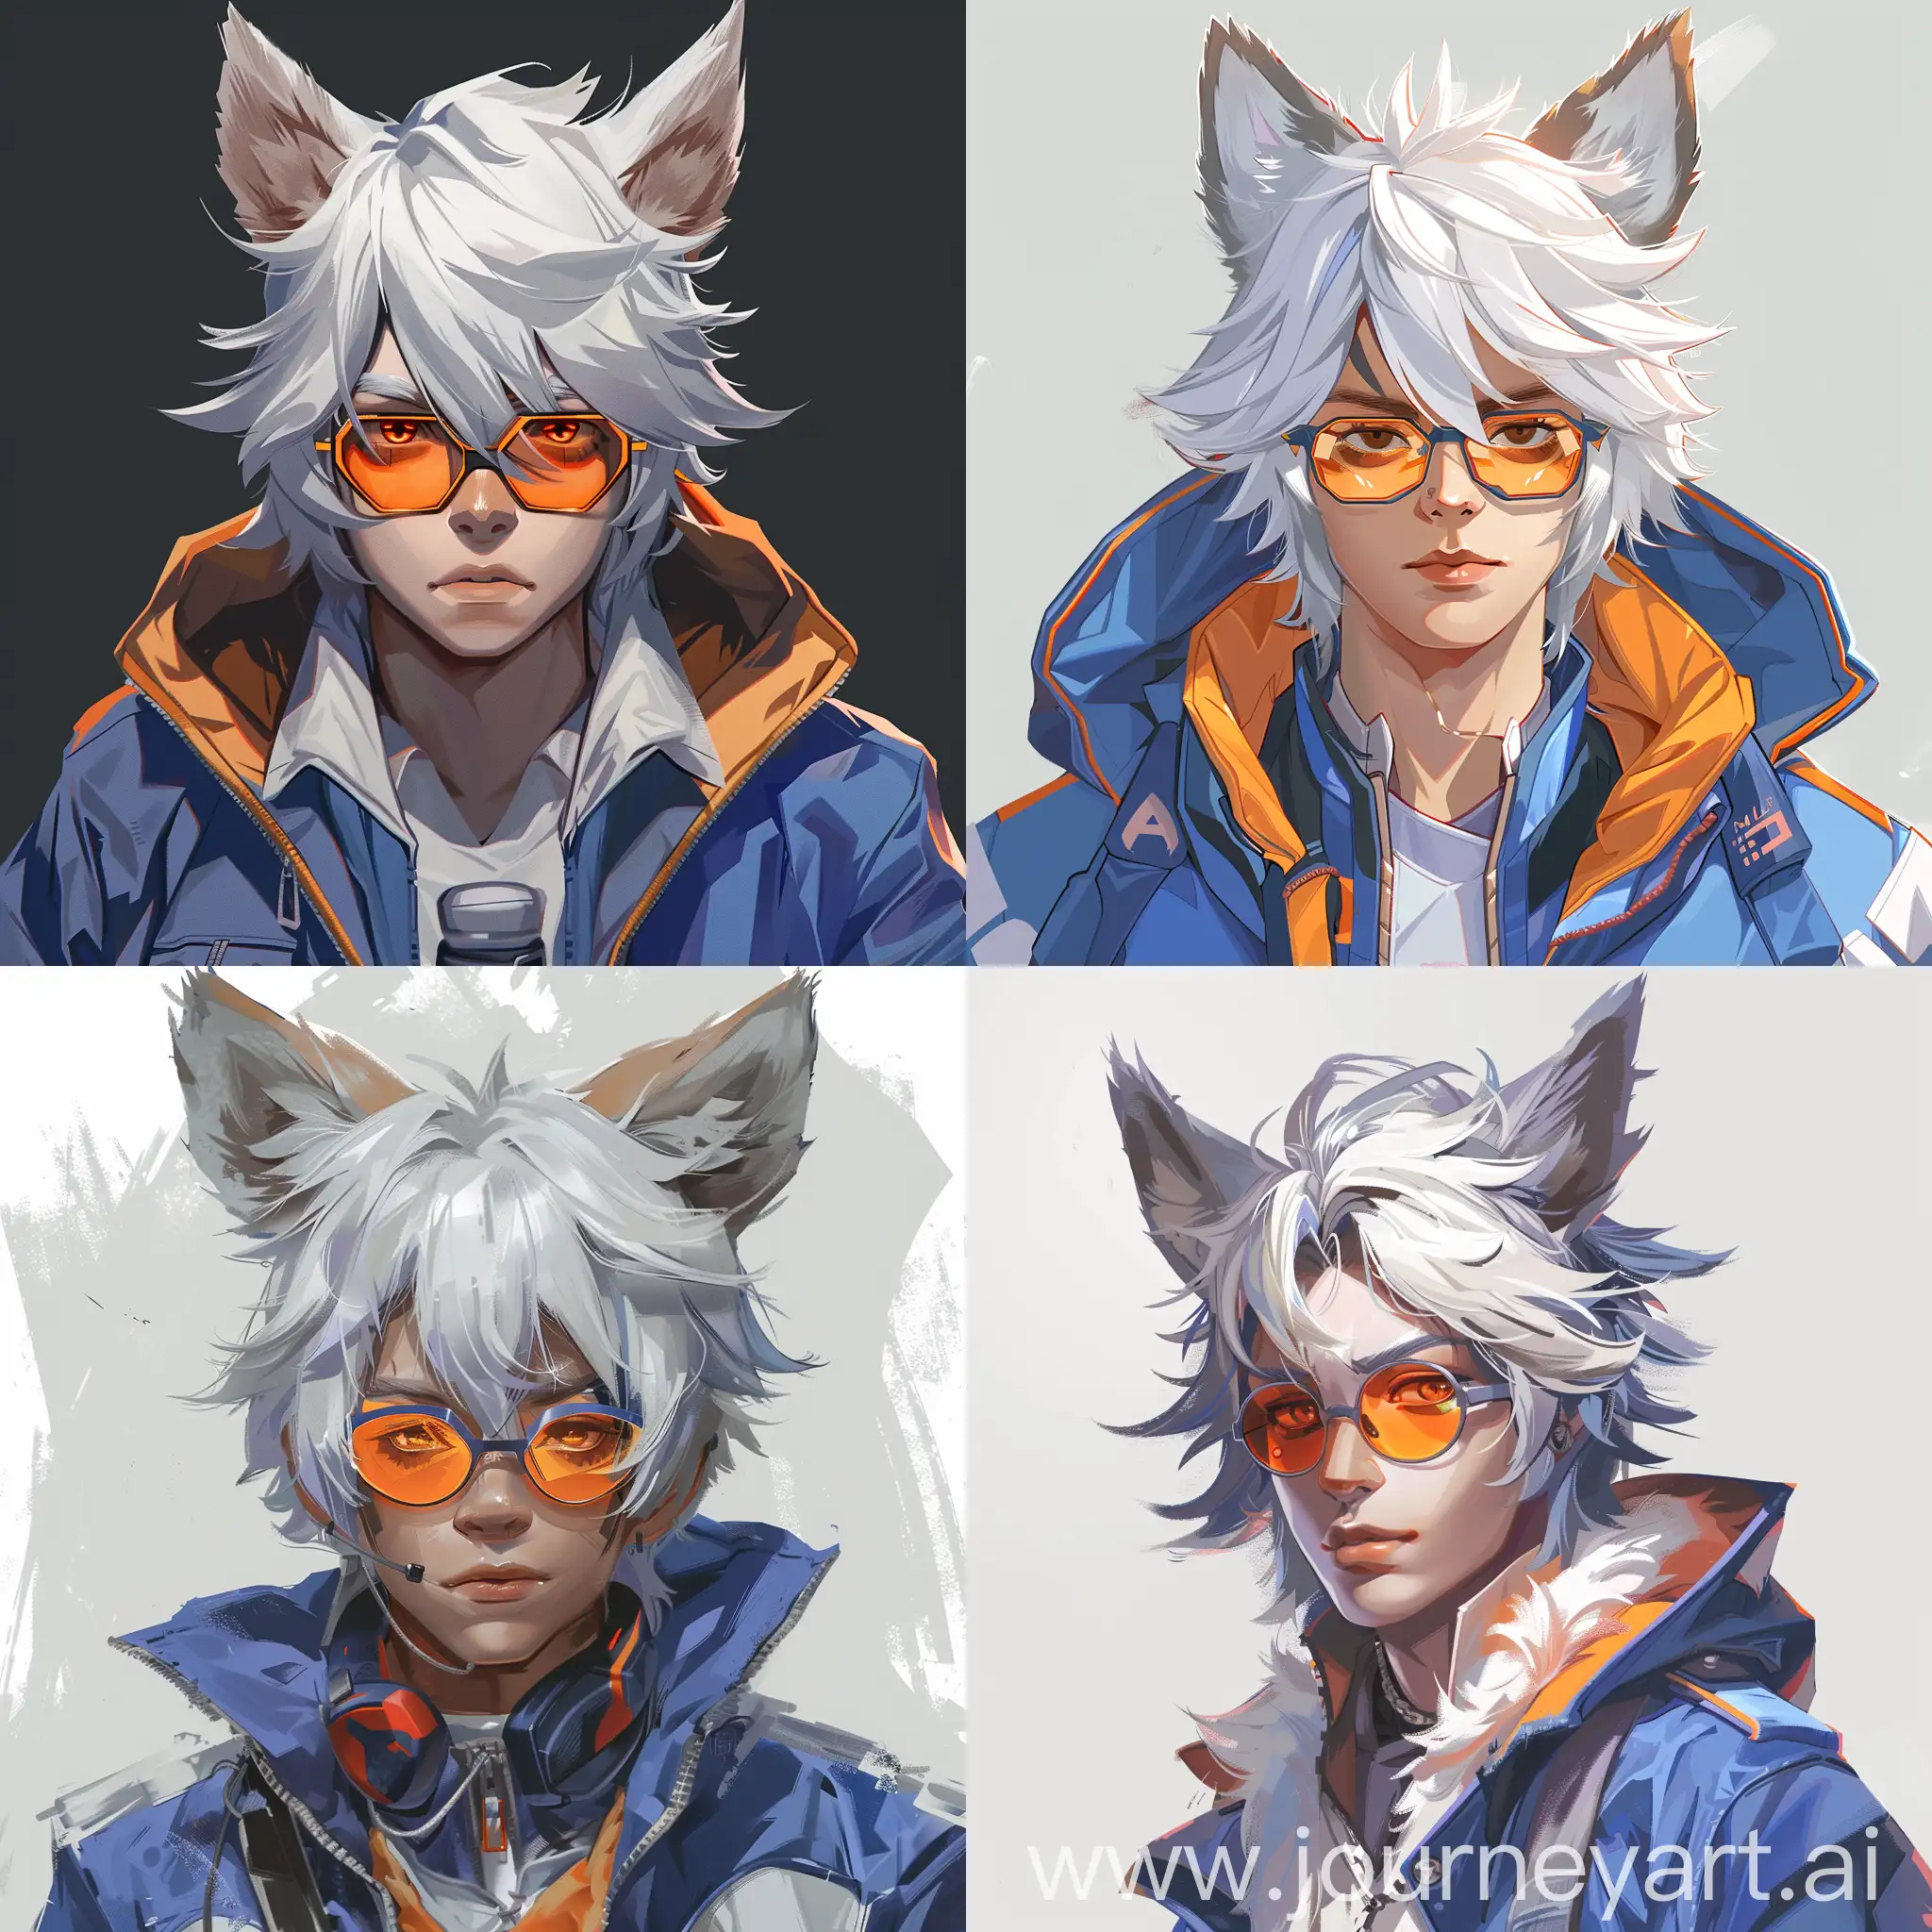 Arknights character illustration of a young man with wolf ears, white hair, orange glasses, and a blue jacket, portrait